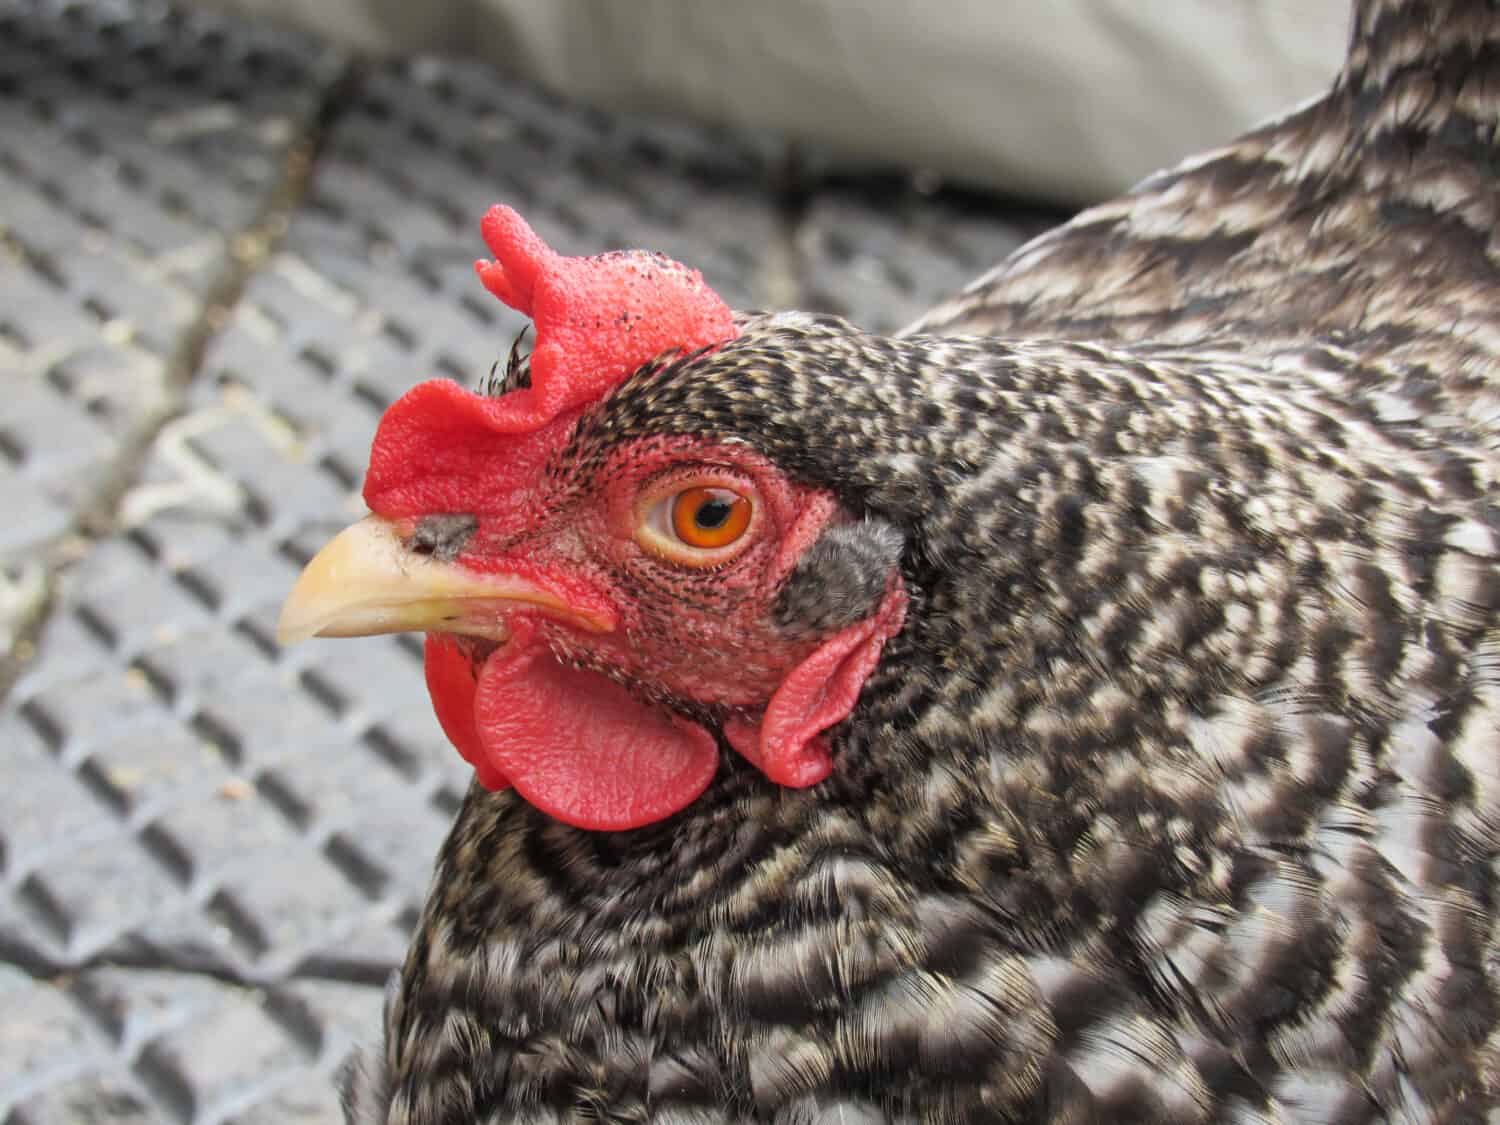 Close-up head shot of a Califonia grey chicken looking at the camera in a farmyard in Belfast, Ireland